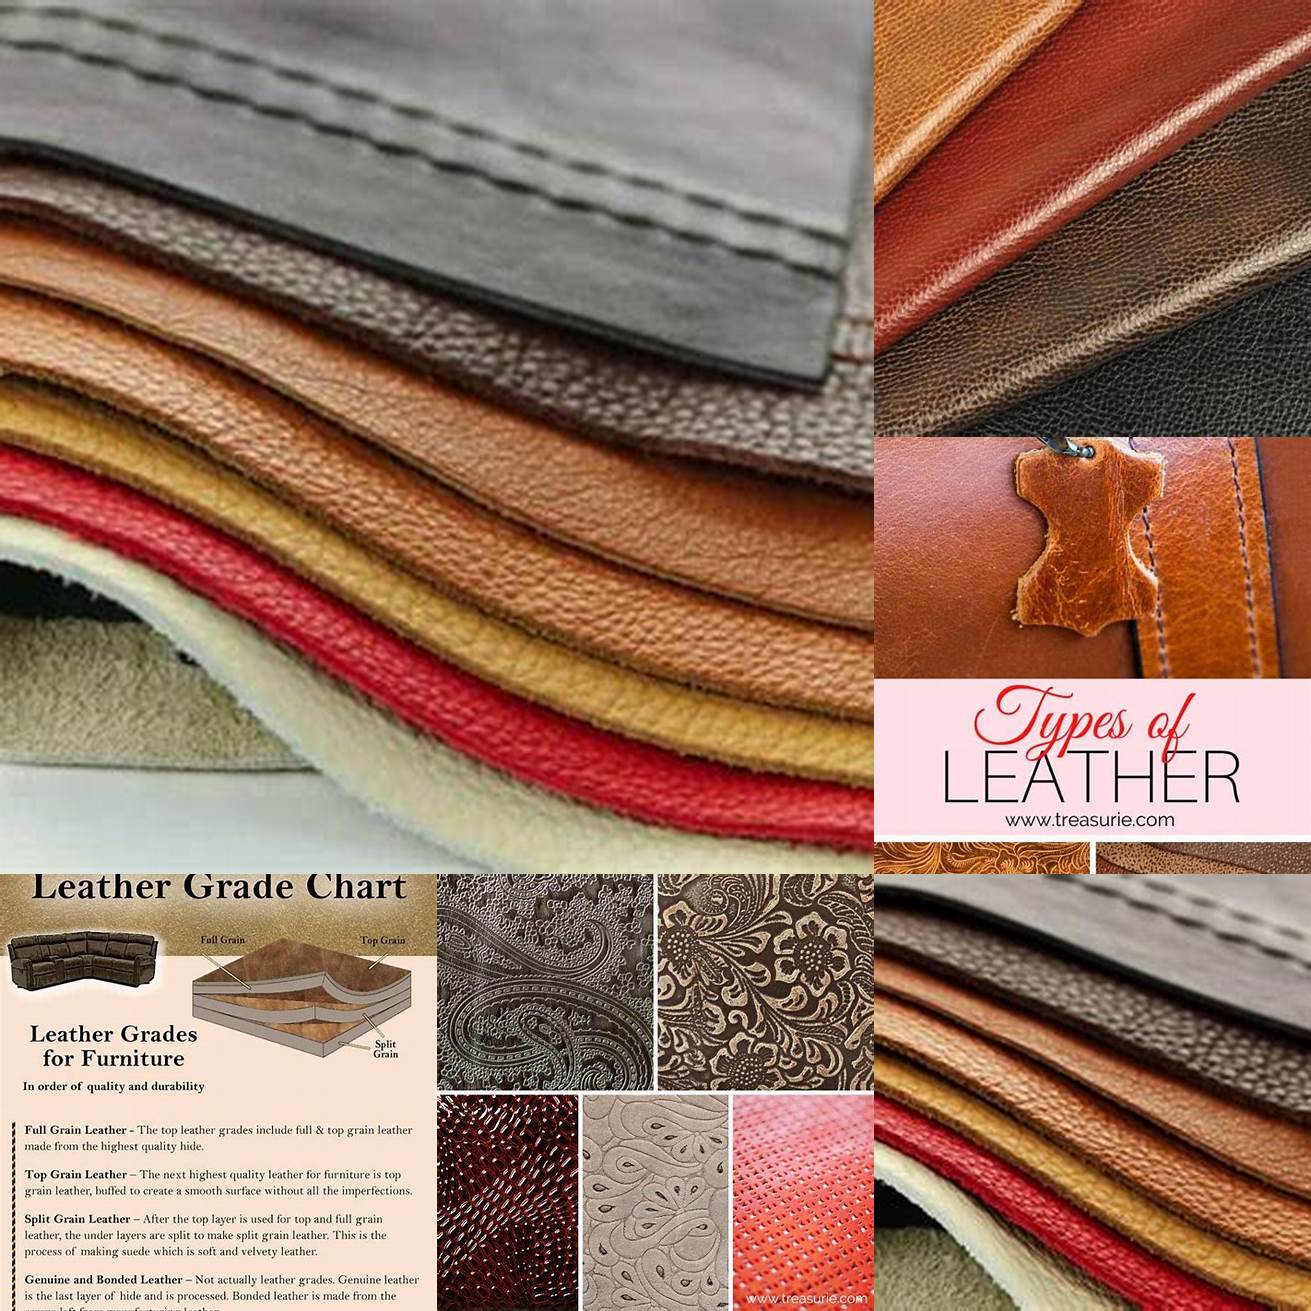 Leather type and quality